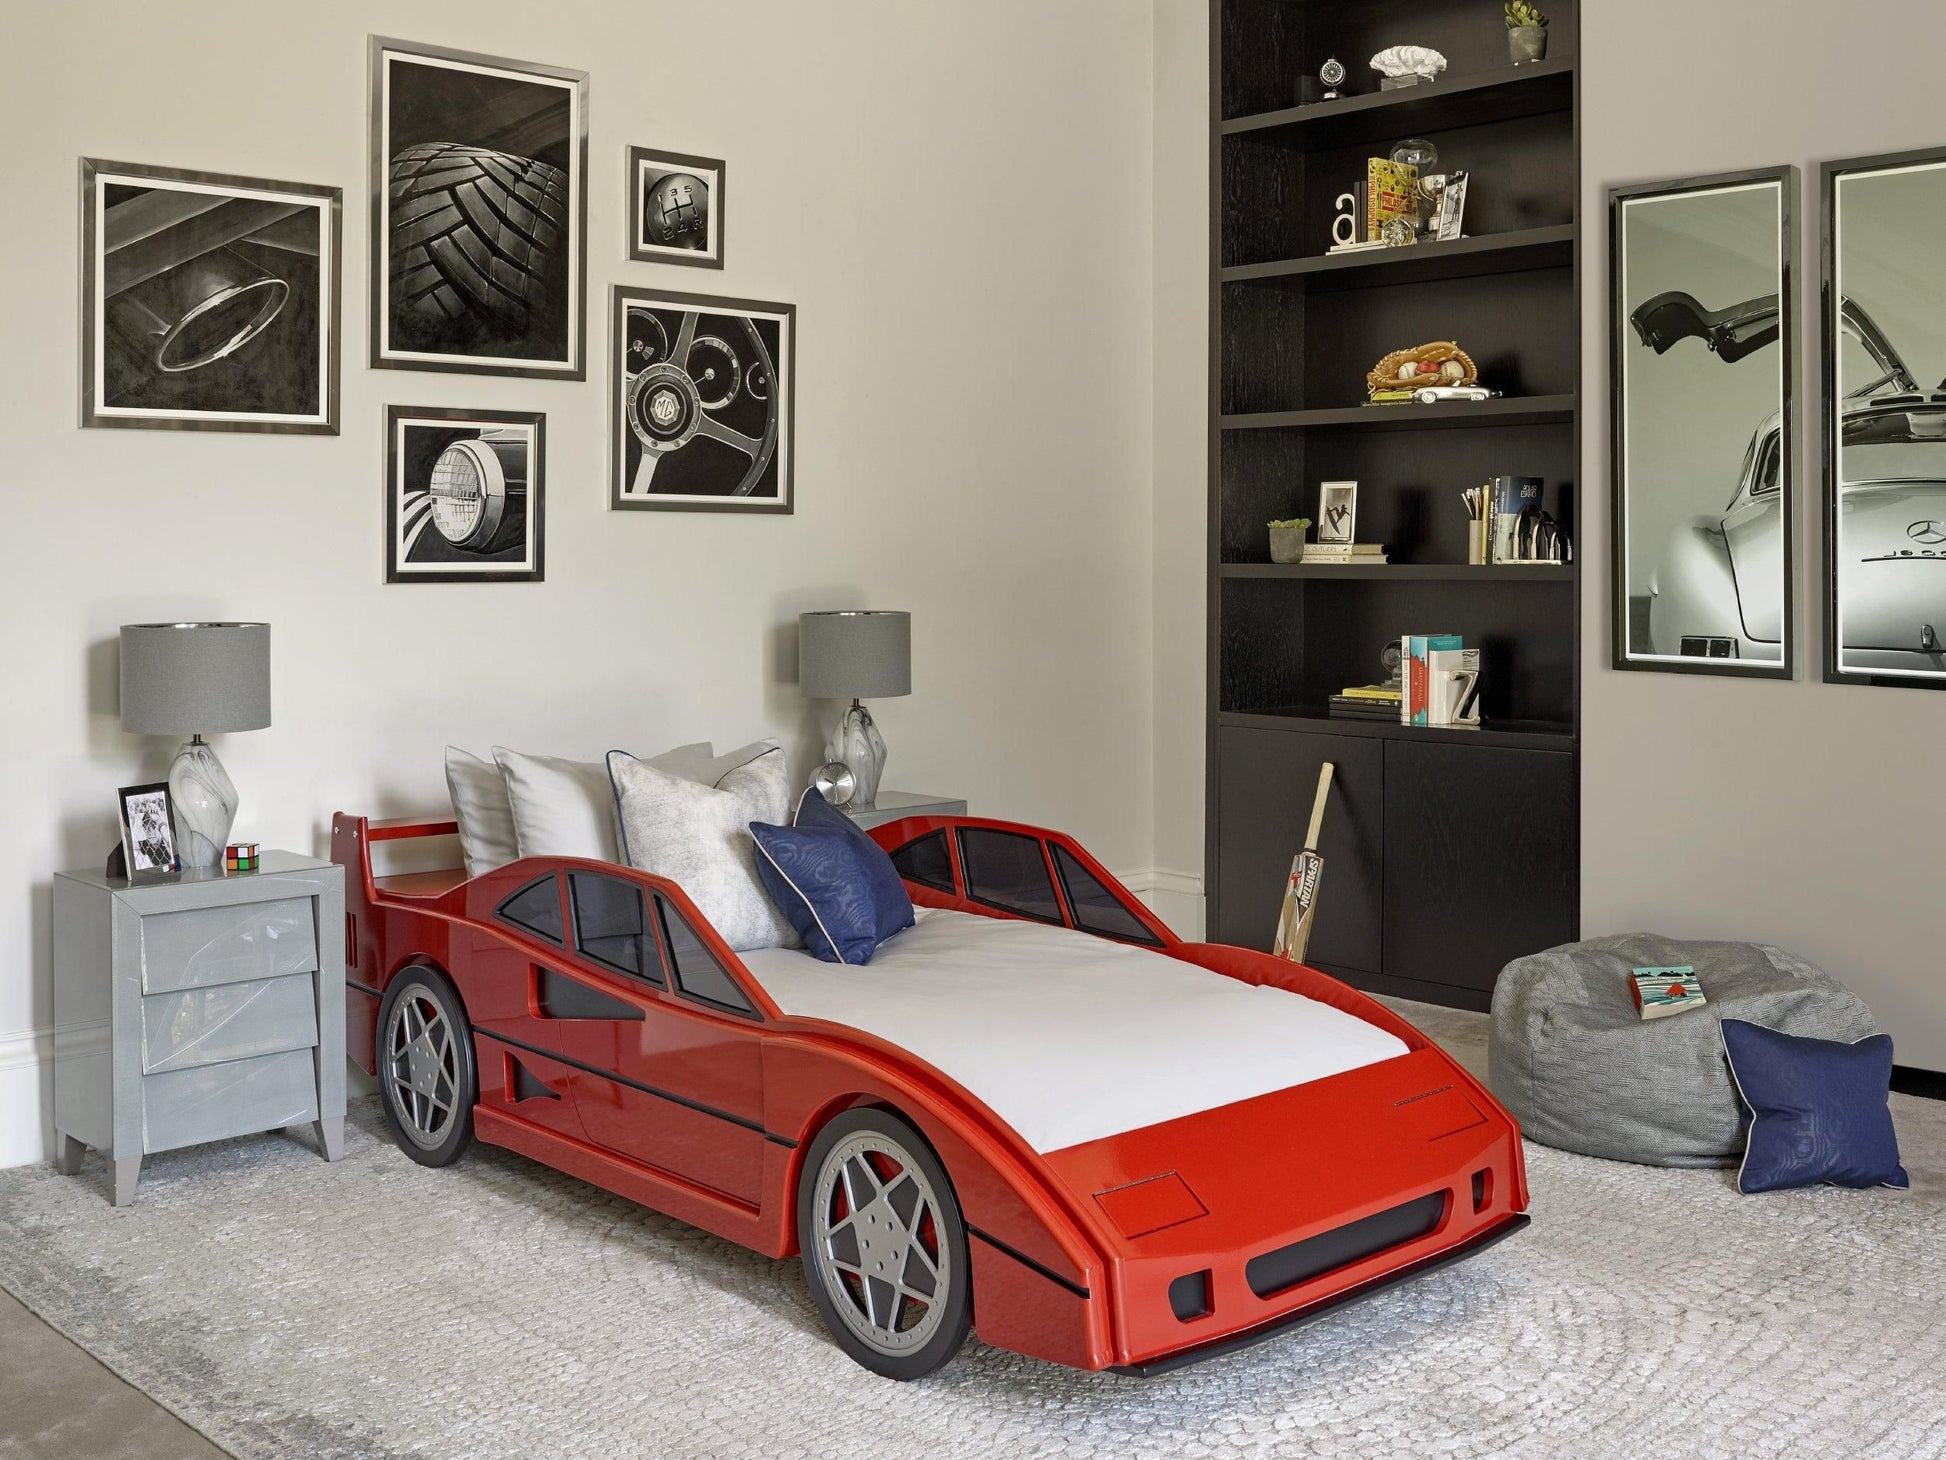 The Dragons RC79 - Single Racing Car Bed in Red - Kids race car bed | Dragons of Walton Street